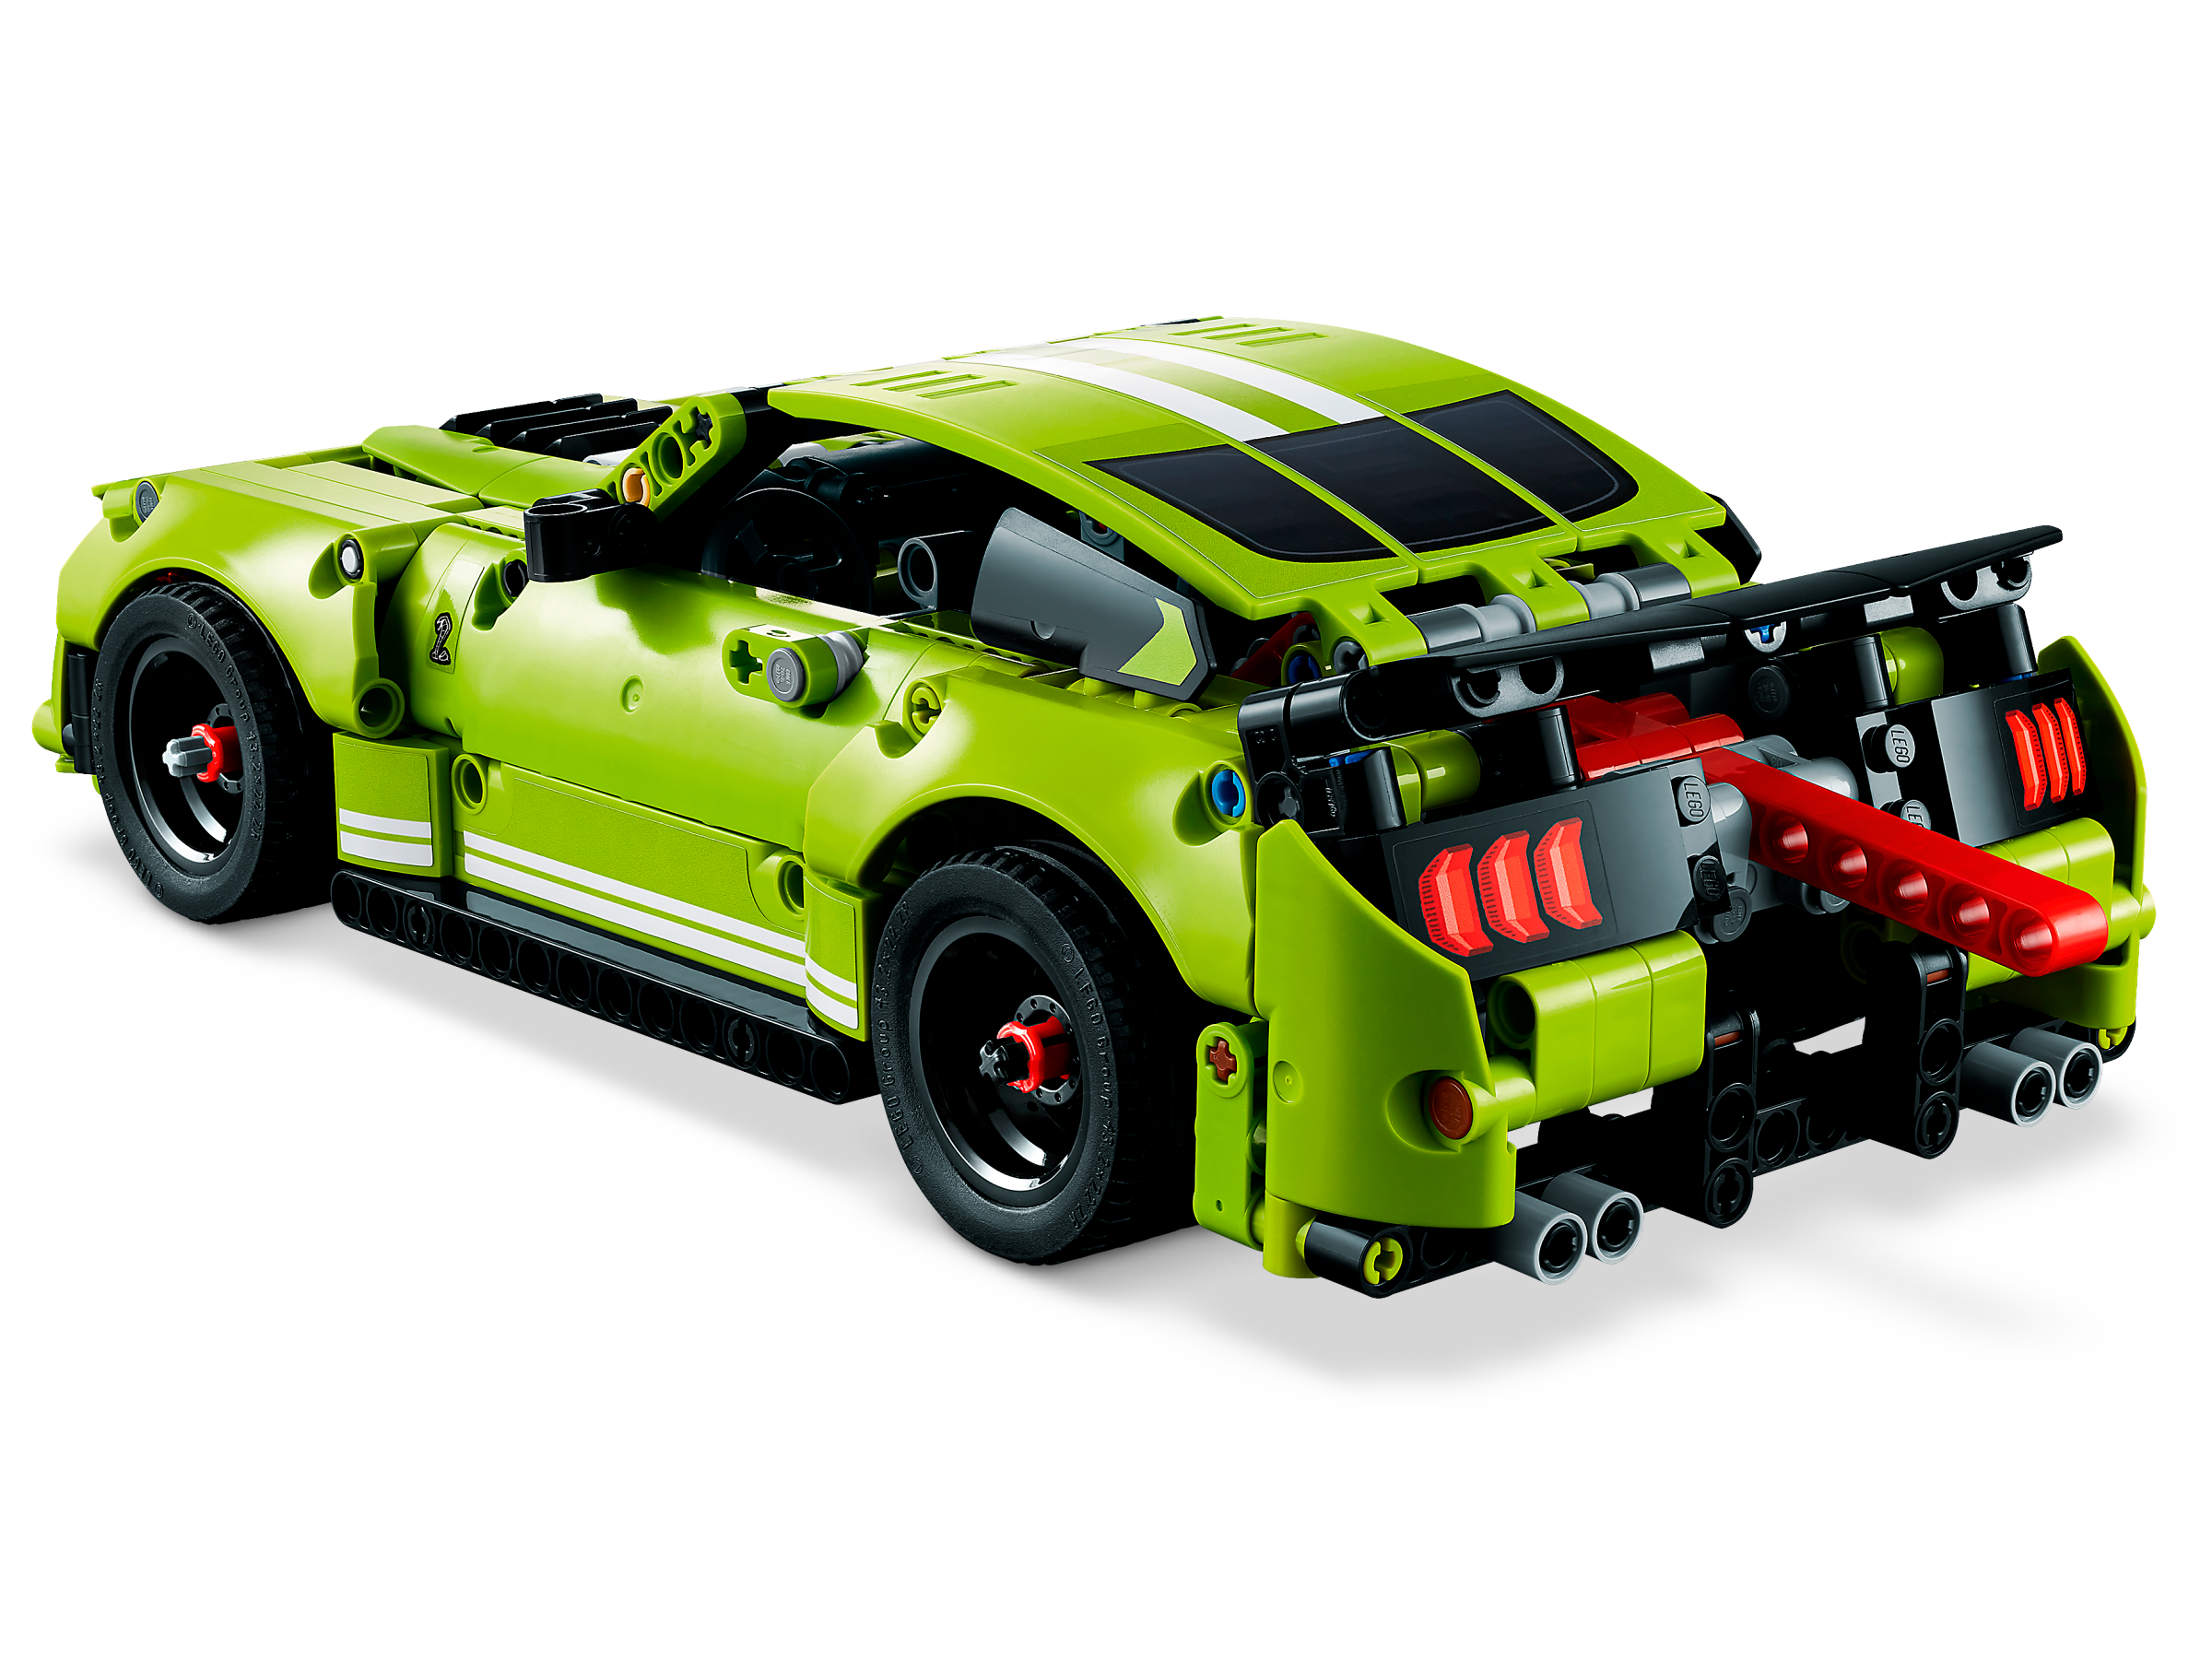 LEGO 42138 Ford Mustang Shelby GT500